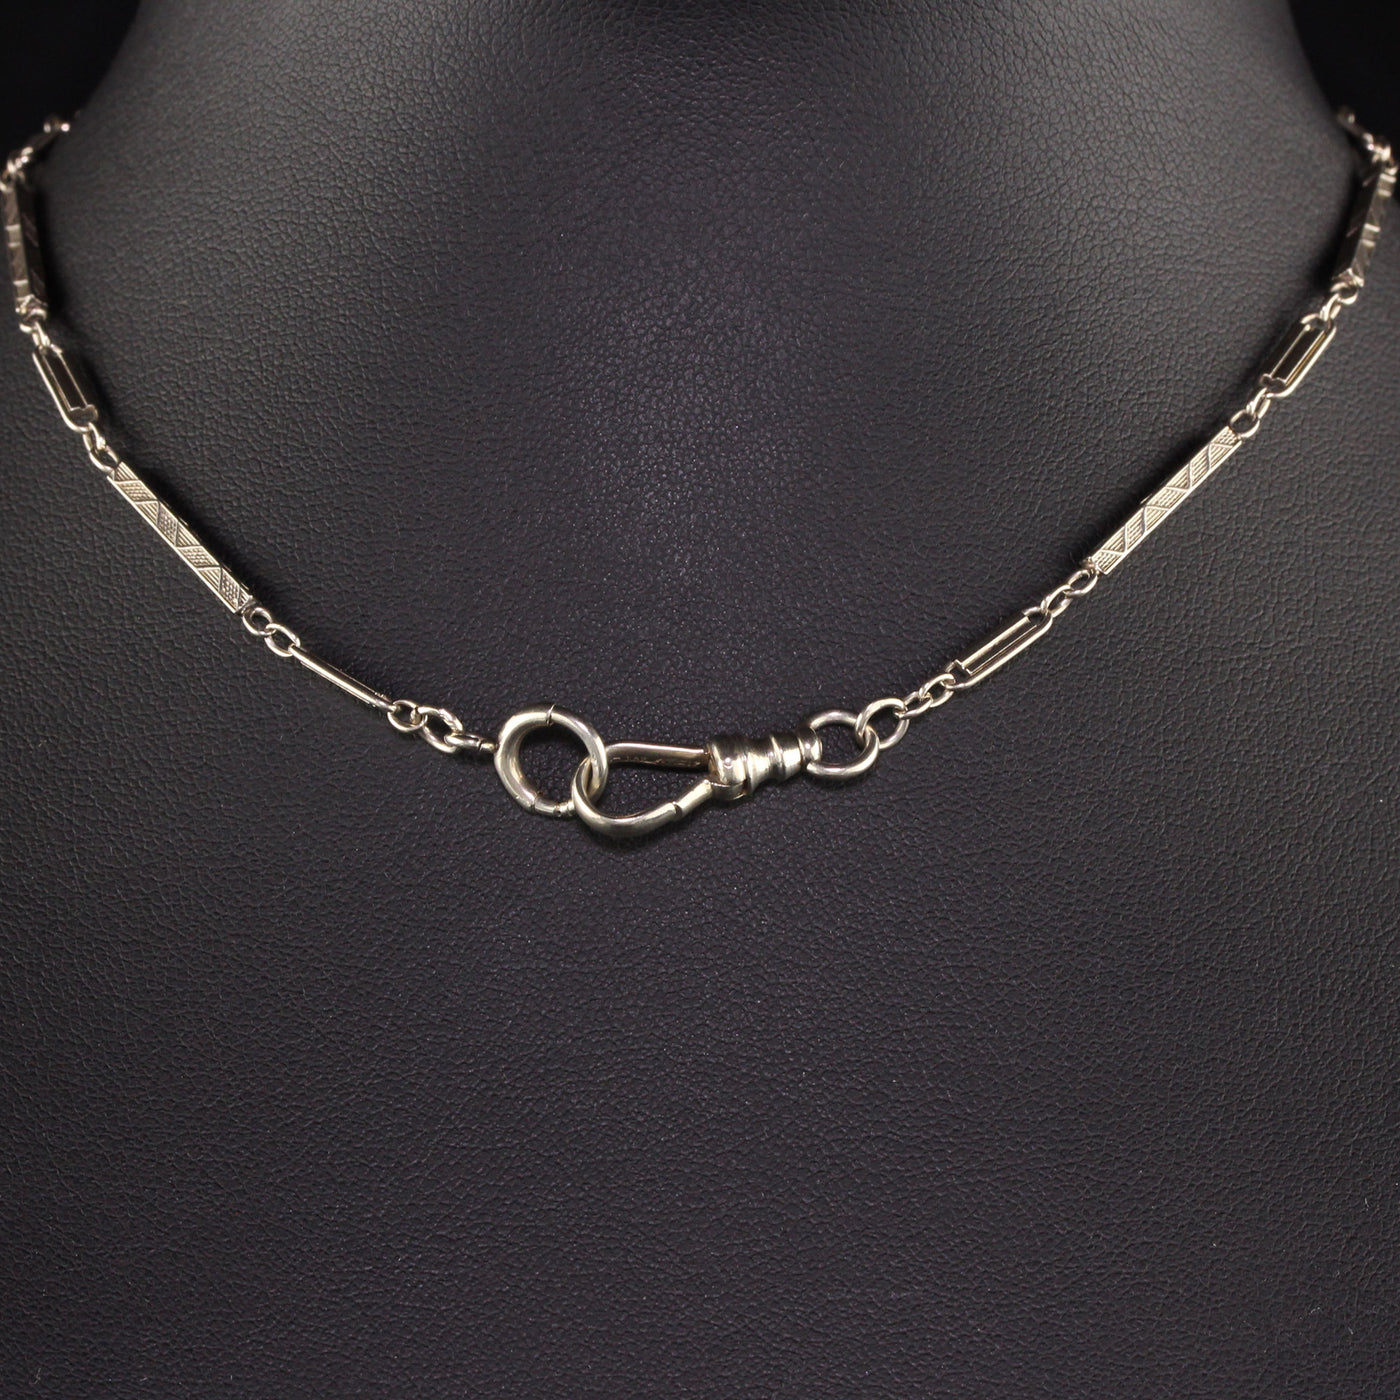 Antique Art Deco 14K White Gold Intricate Link Chain - 13 inches